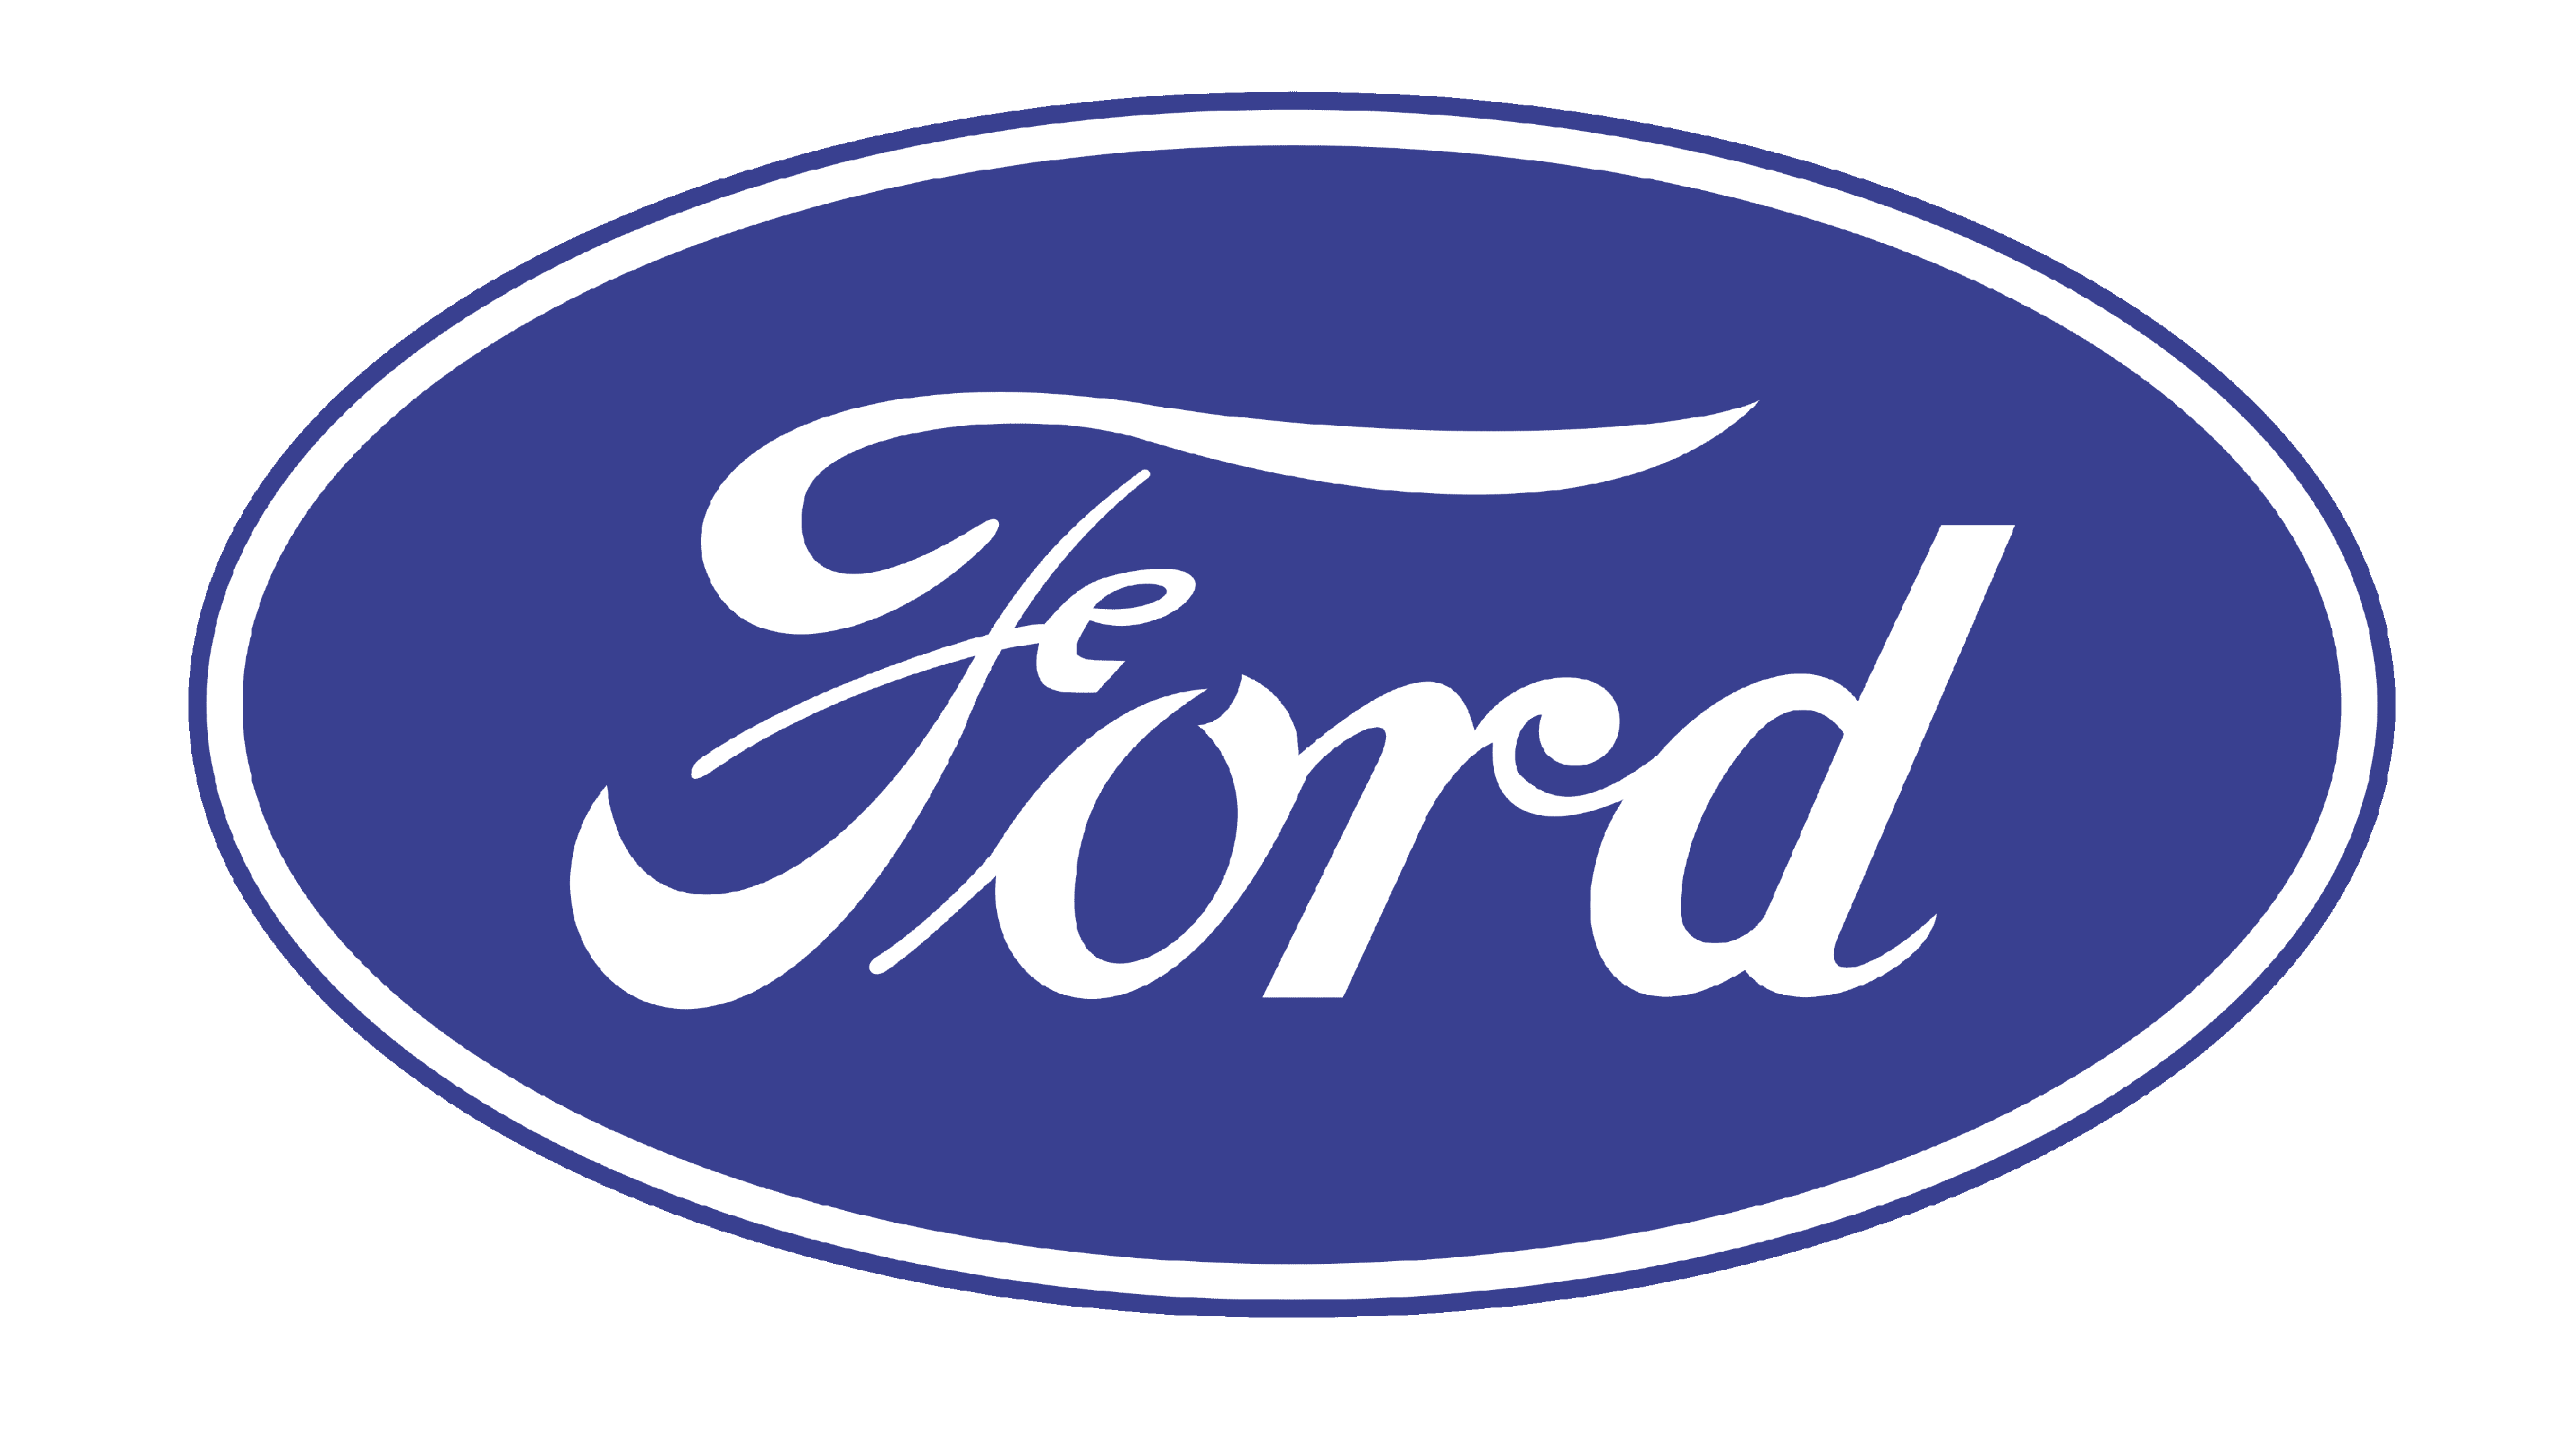 Ford Logo Meaning and History [Ford symbol]